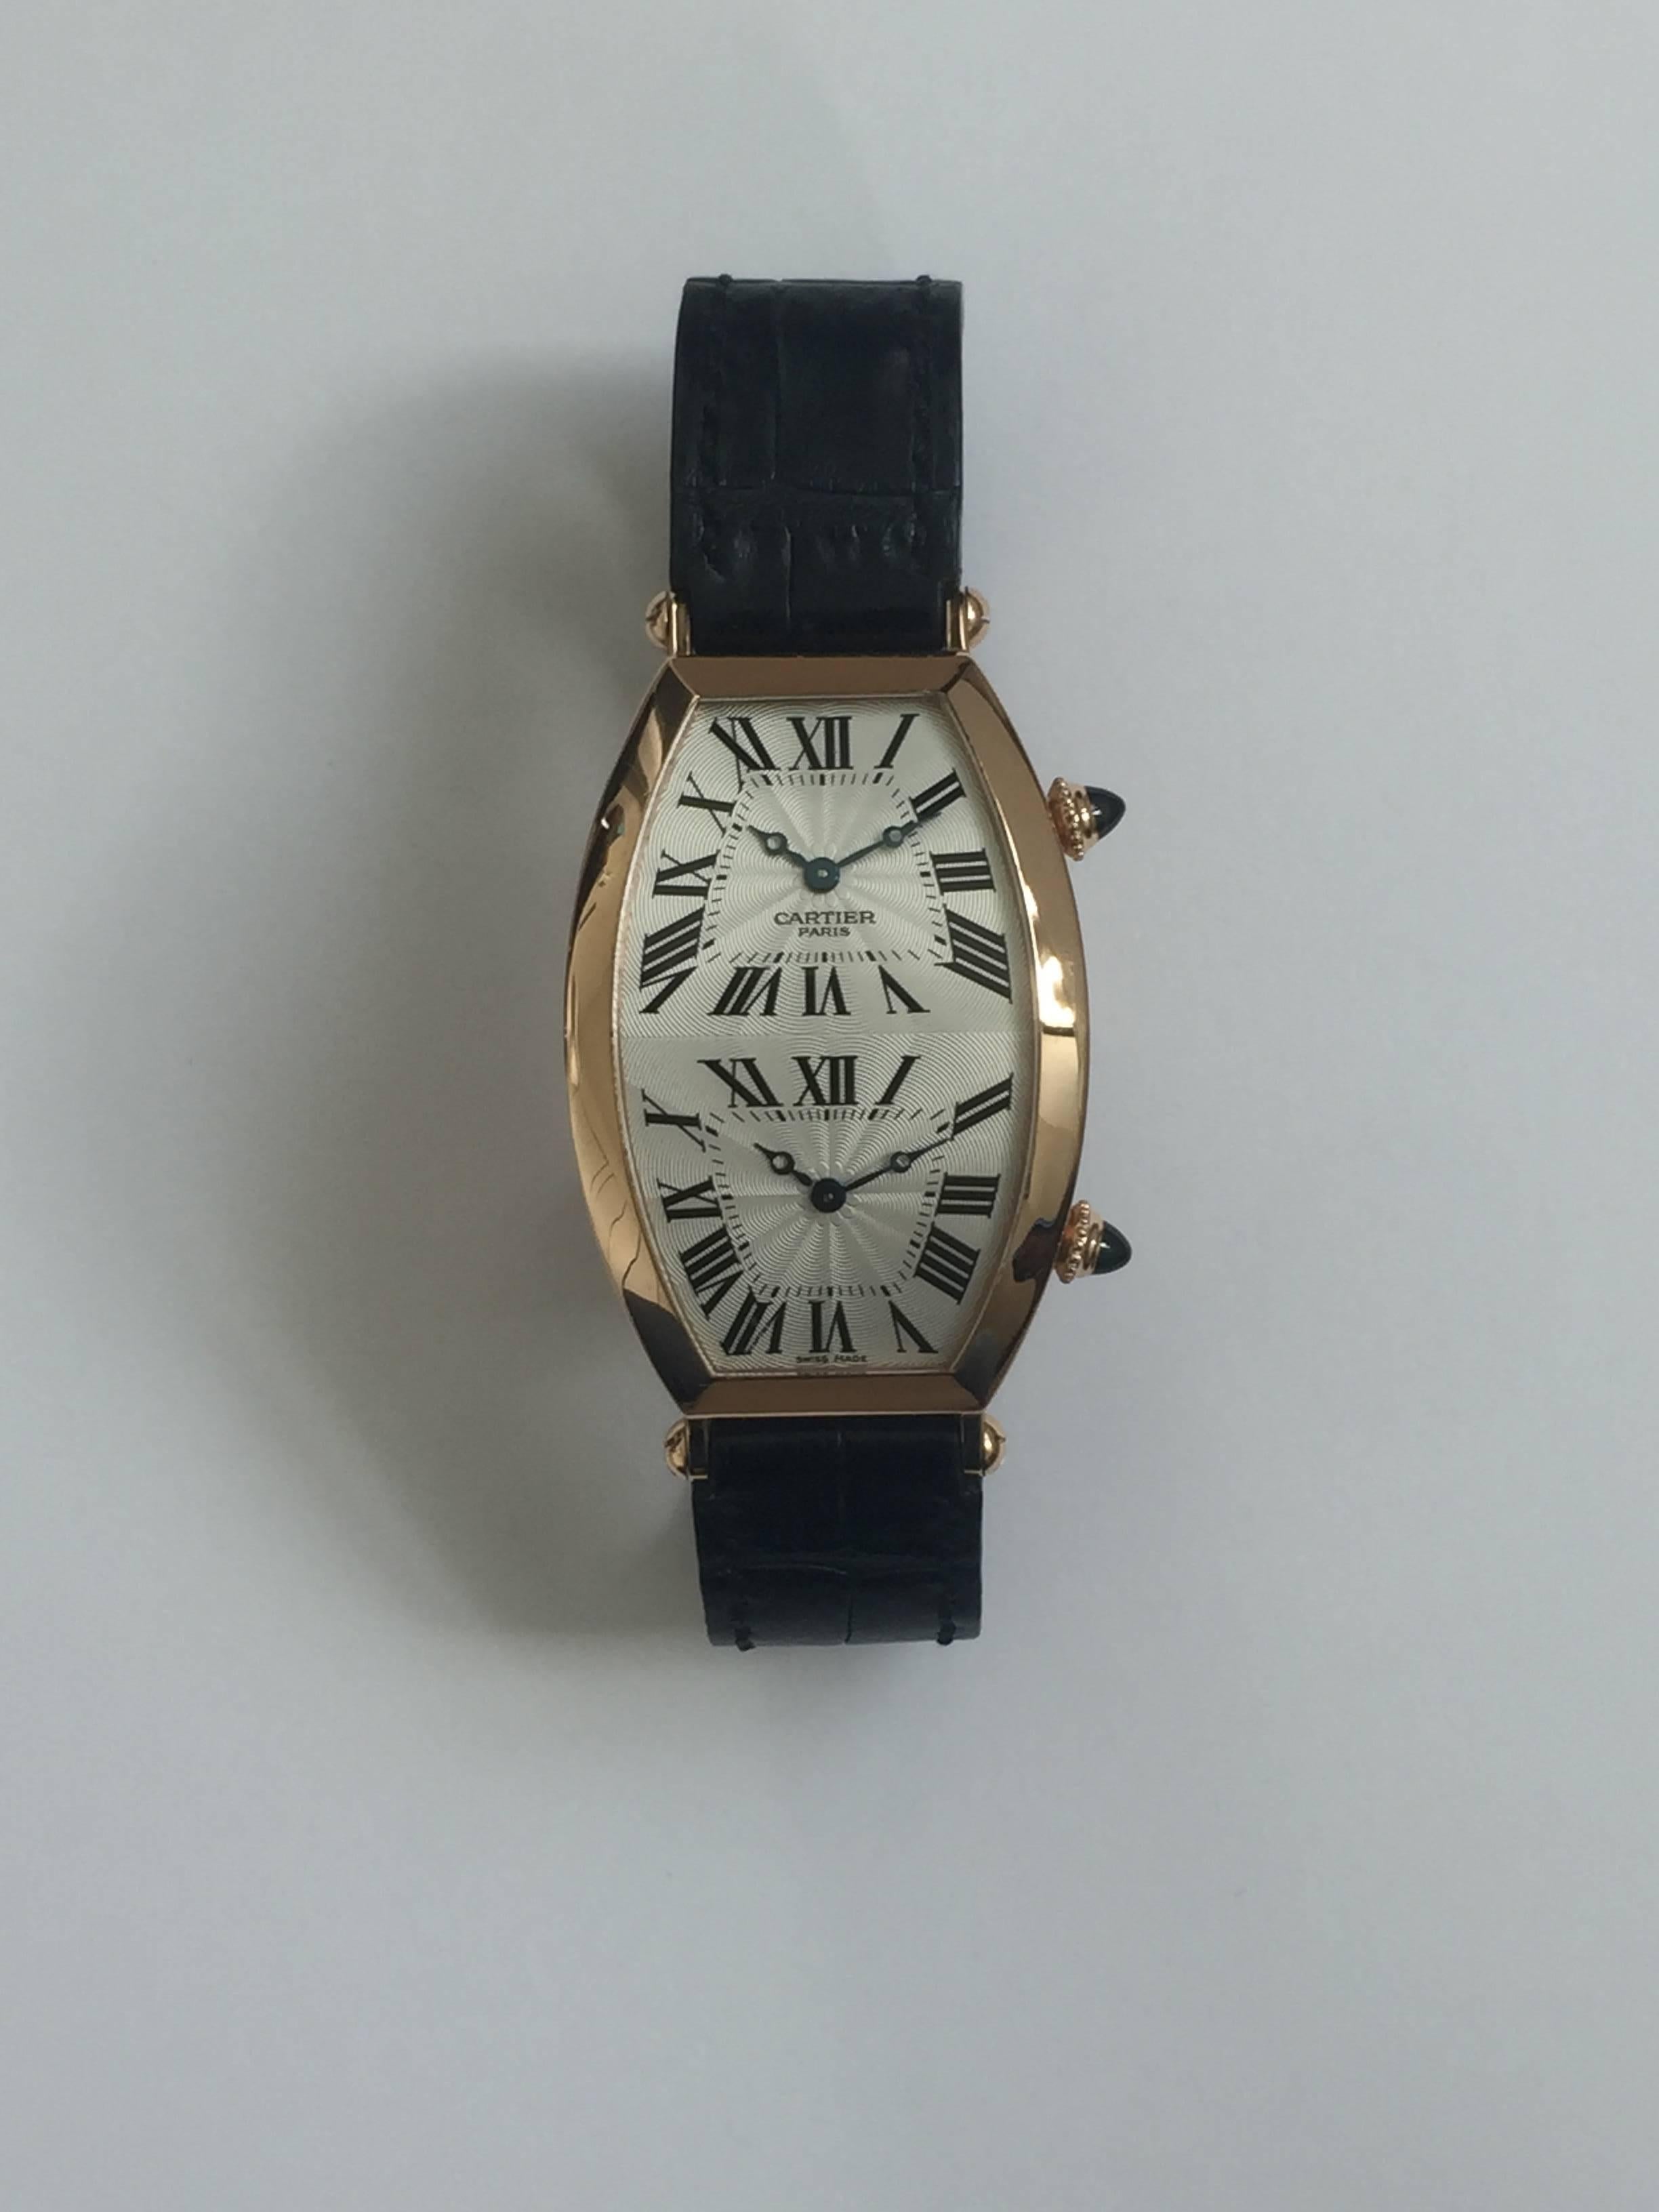 Cartier Paris Rose Gold Tonneau Cintree Dual Time Mechanical Wristwatch In Excellent Condition For Sale In New York, NY